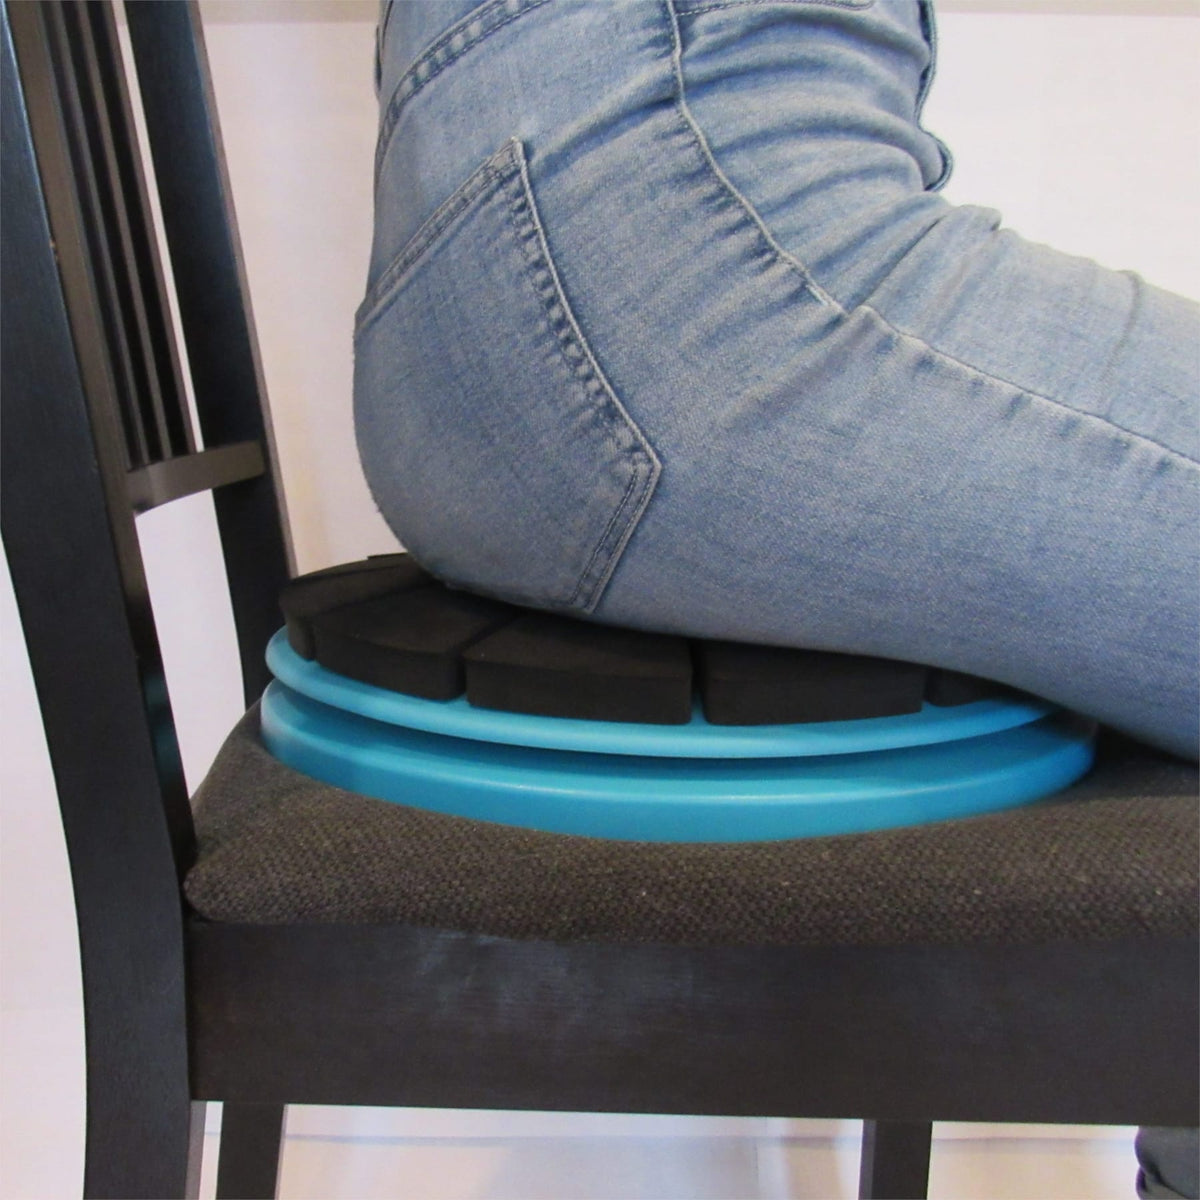 Close up of the Core-Tex Sit being used on at home chair by women in jeans.